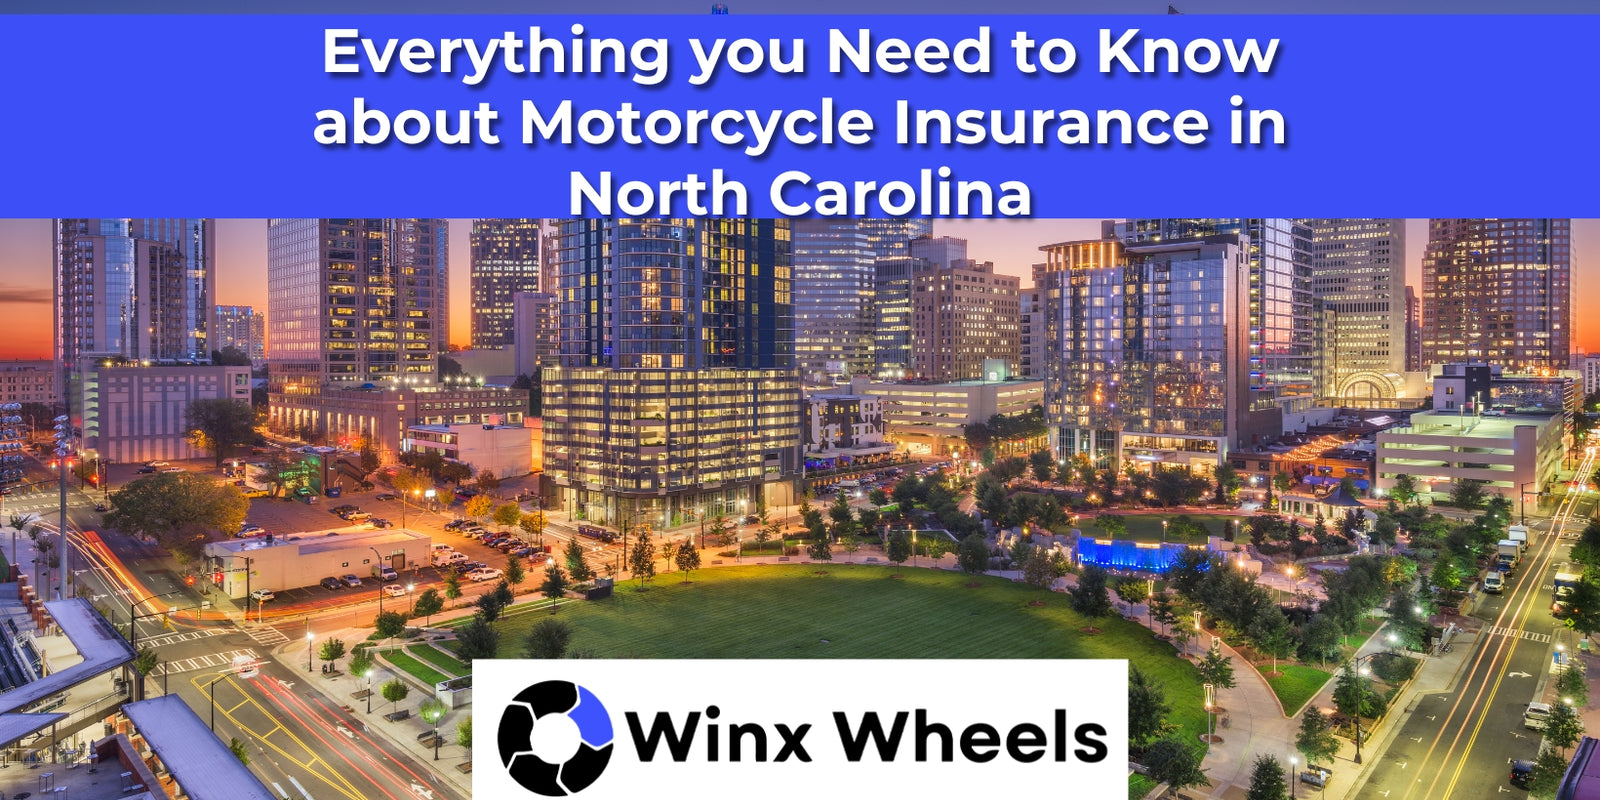 Everything you Need to Know about Motorcycle Insurance in North Carolina